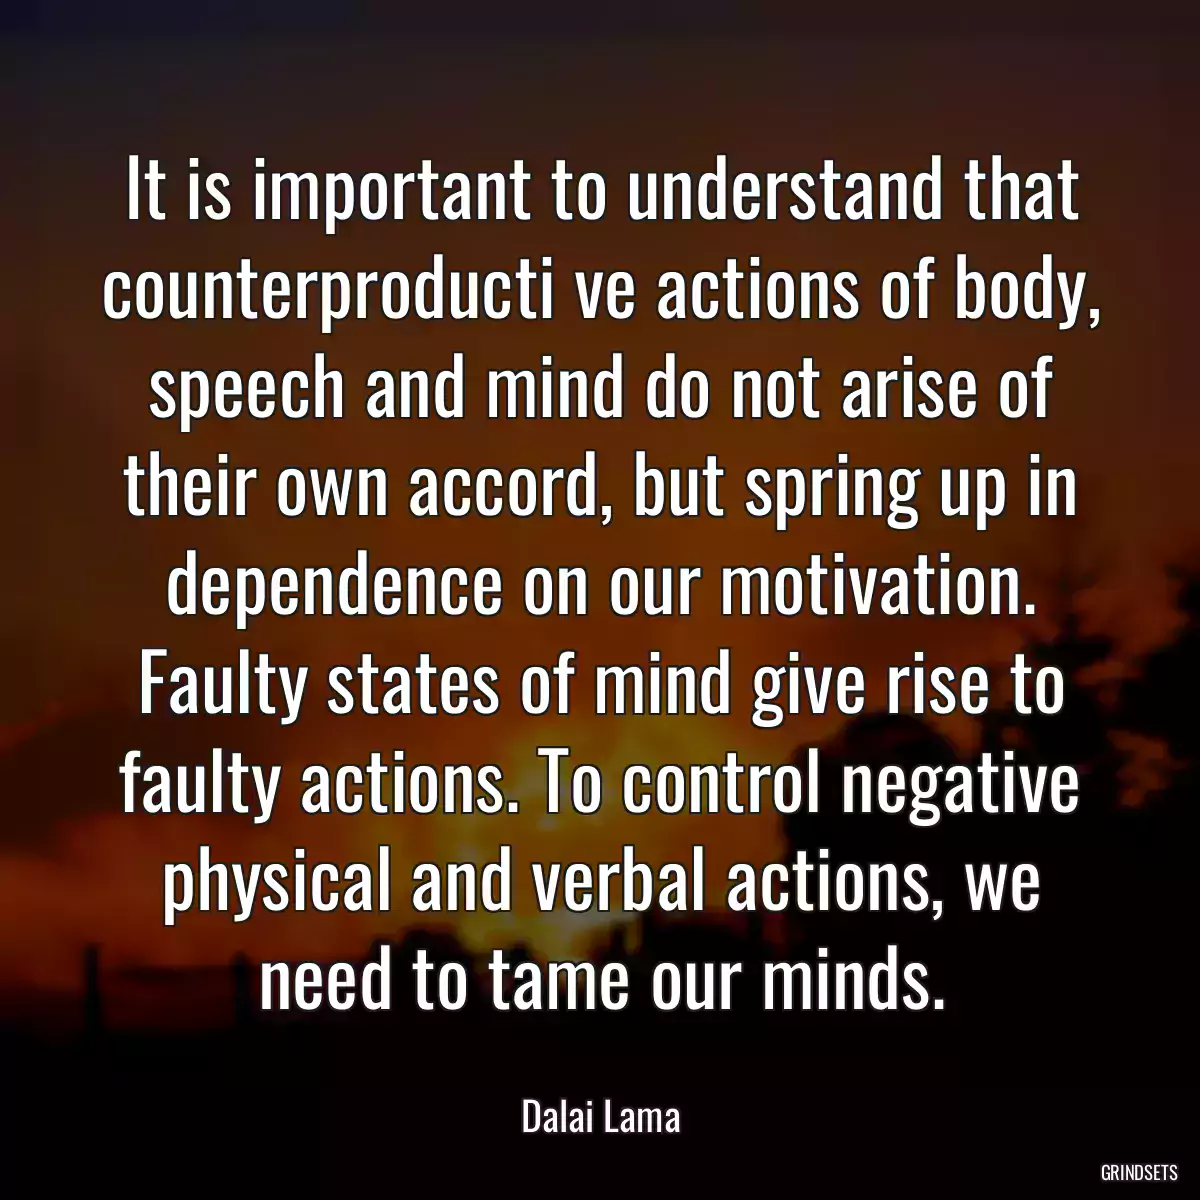 It is important to understand that counterproducti ve actions of body, speech and mind do not arise of their own accord, but spring up in dependence on our motivation. Faulty states of mind give rise to faulty actions. To control negative physical and verbal actions, we need to tame our minds.